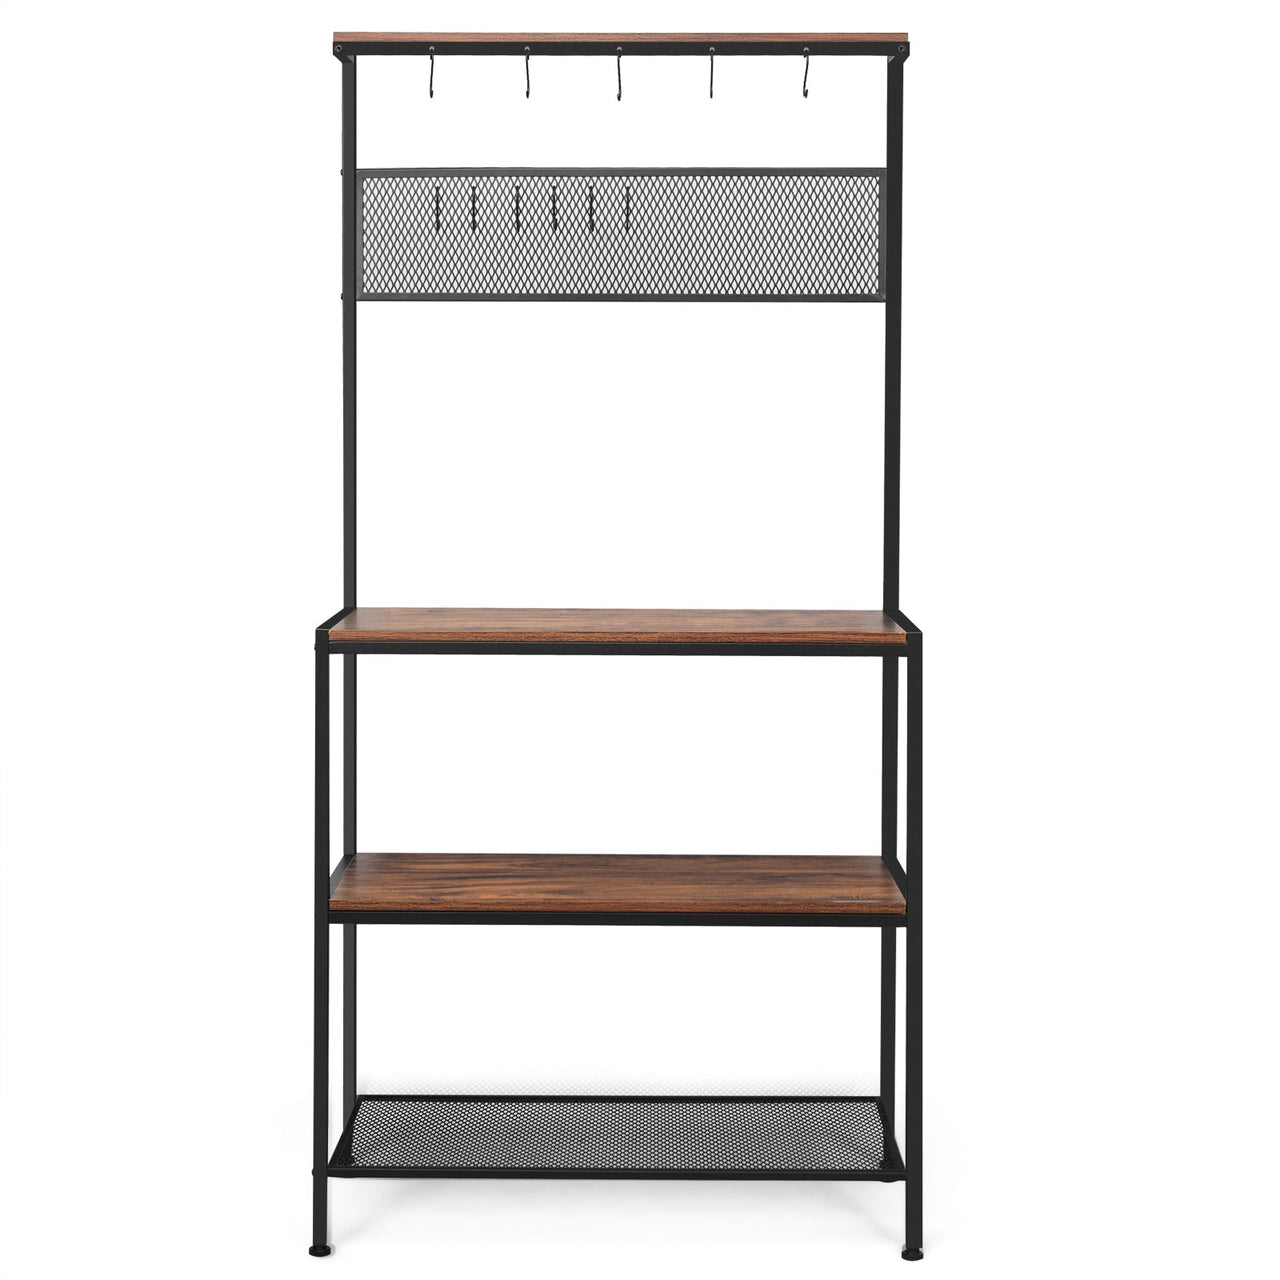 4-Tier Kitchen Rack Stand with Hooks and Mesh Panel